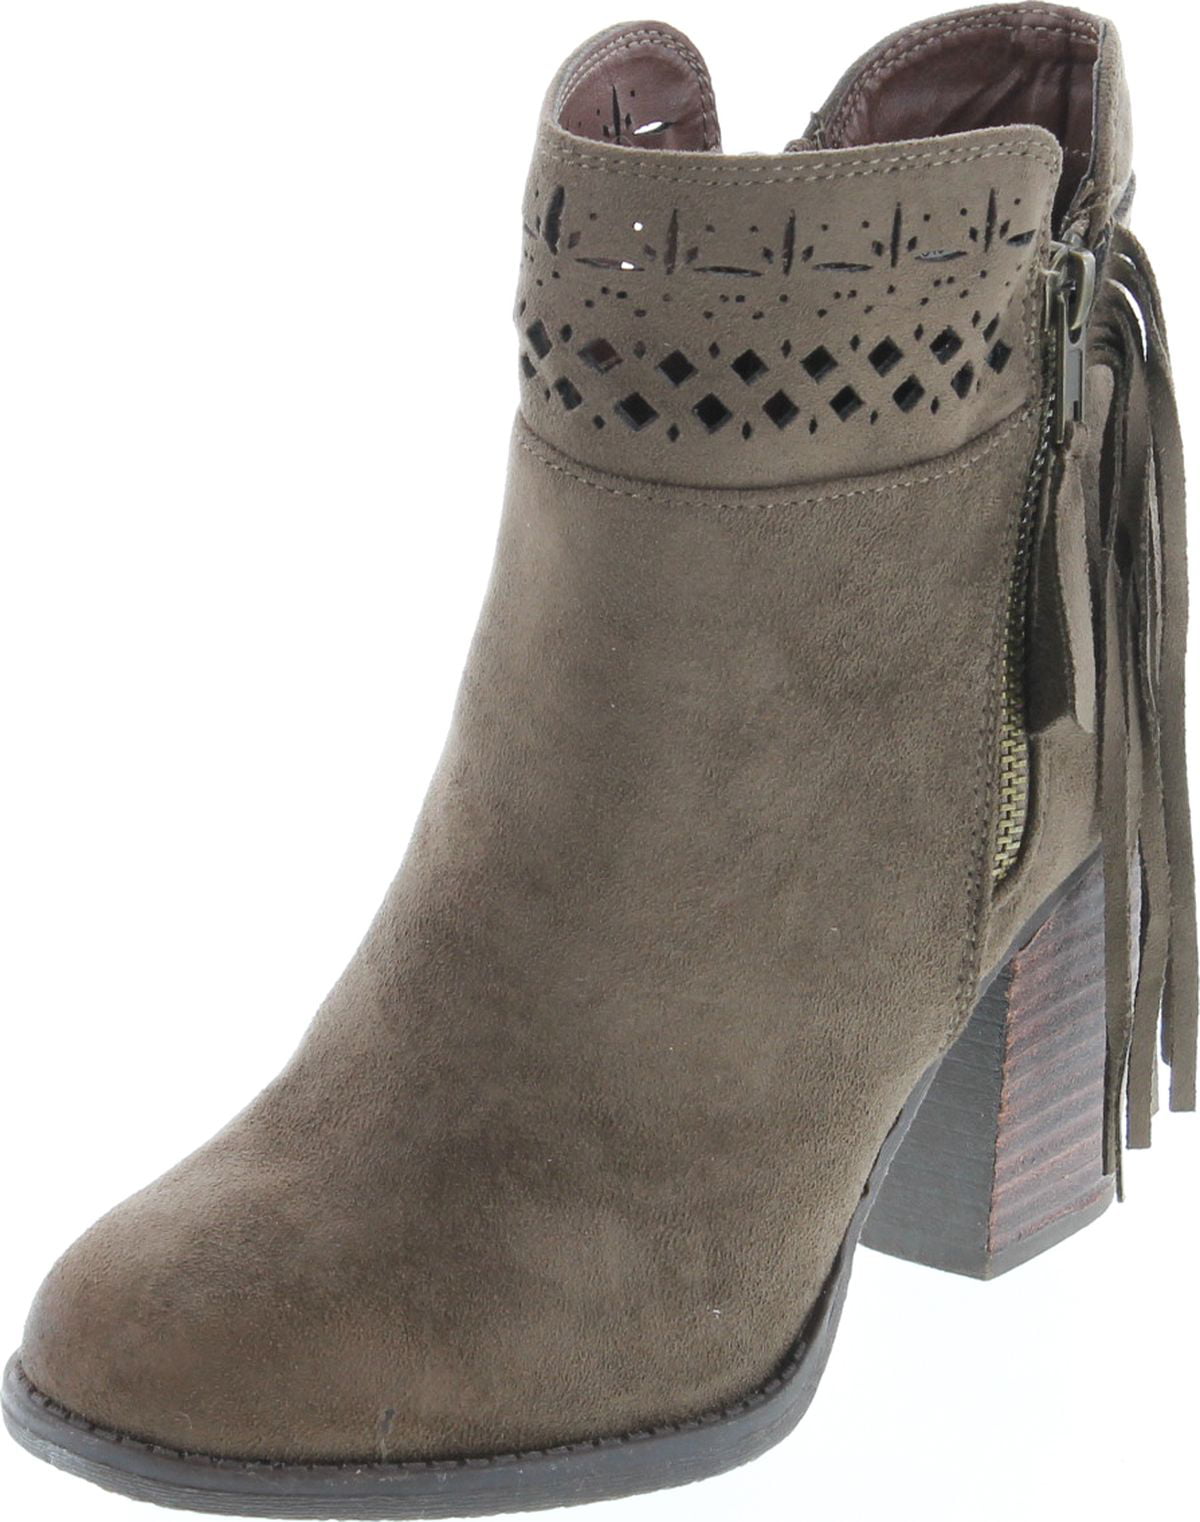 Chinese Laundry Zanga Boot Camel Suede Stacked Heel Ankle Stone Chain Bootie 